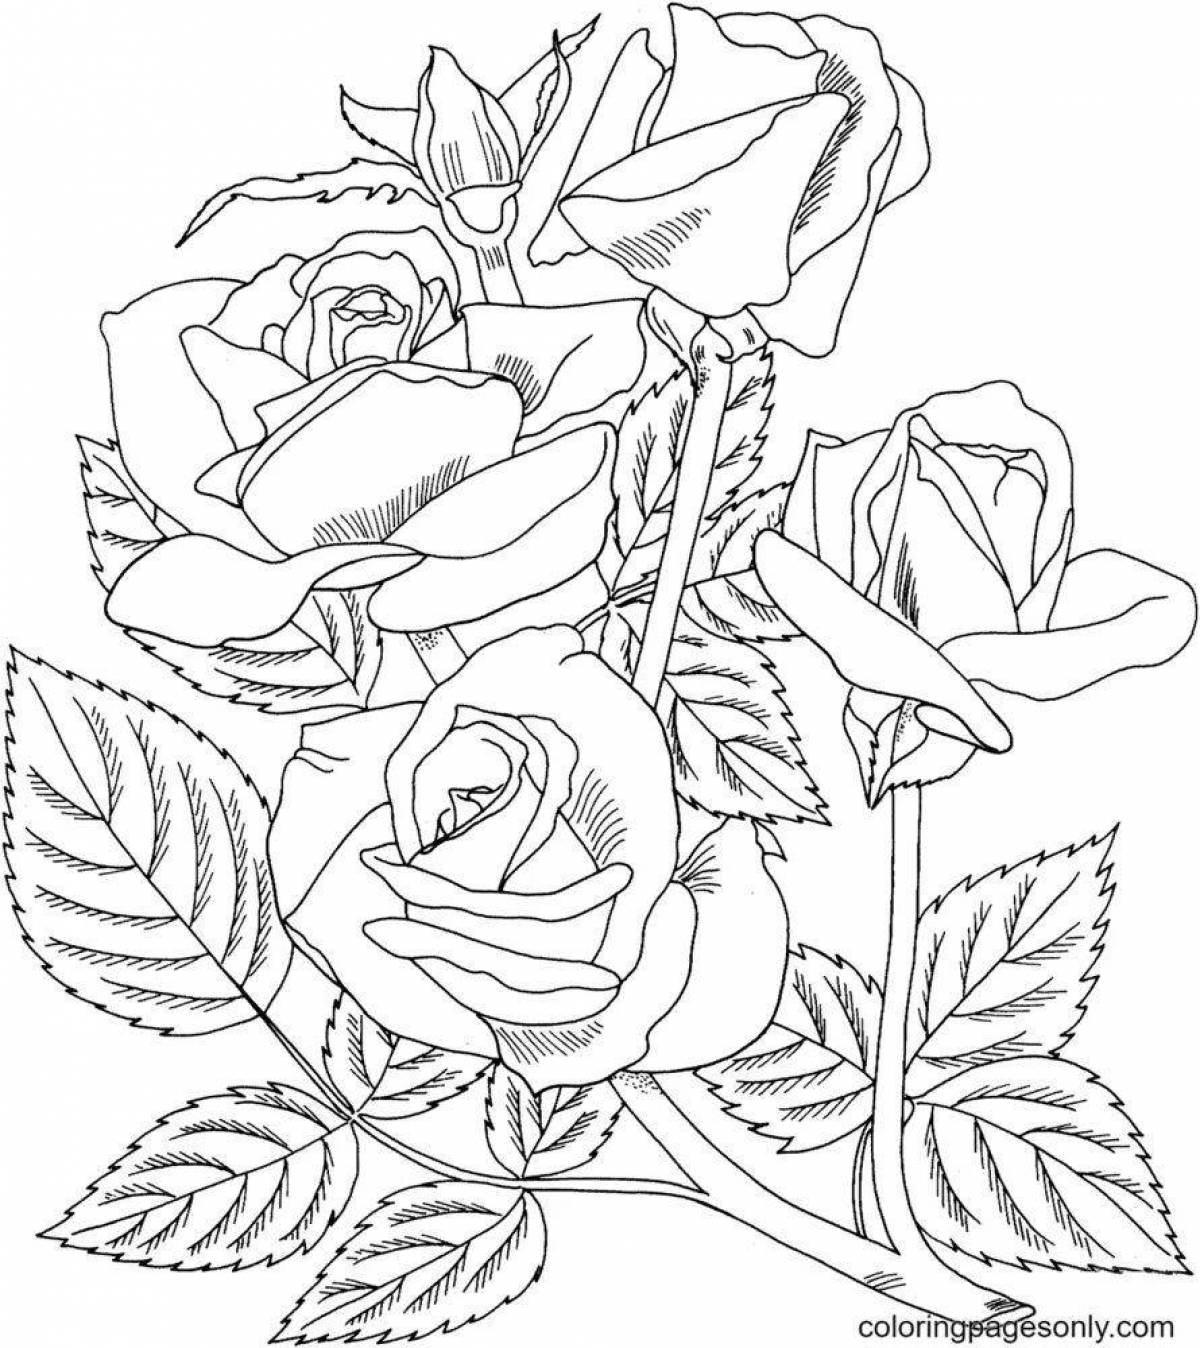 Amazing coloring pages with roses